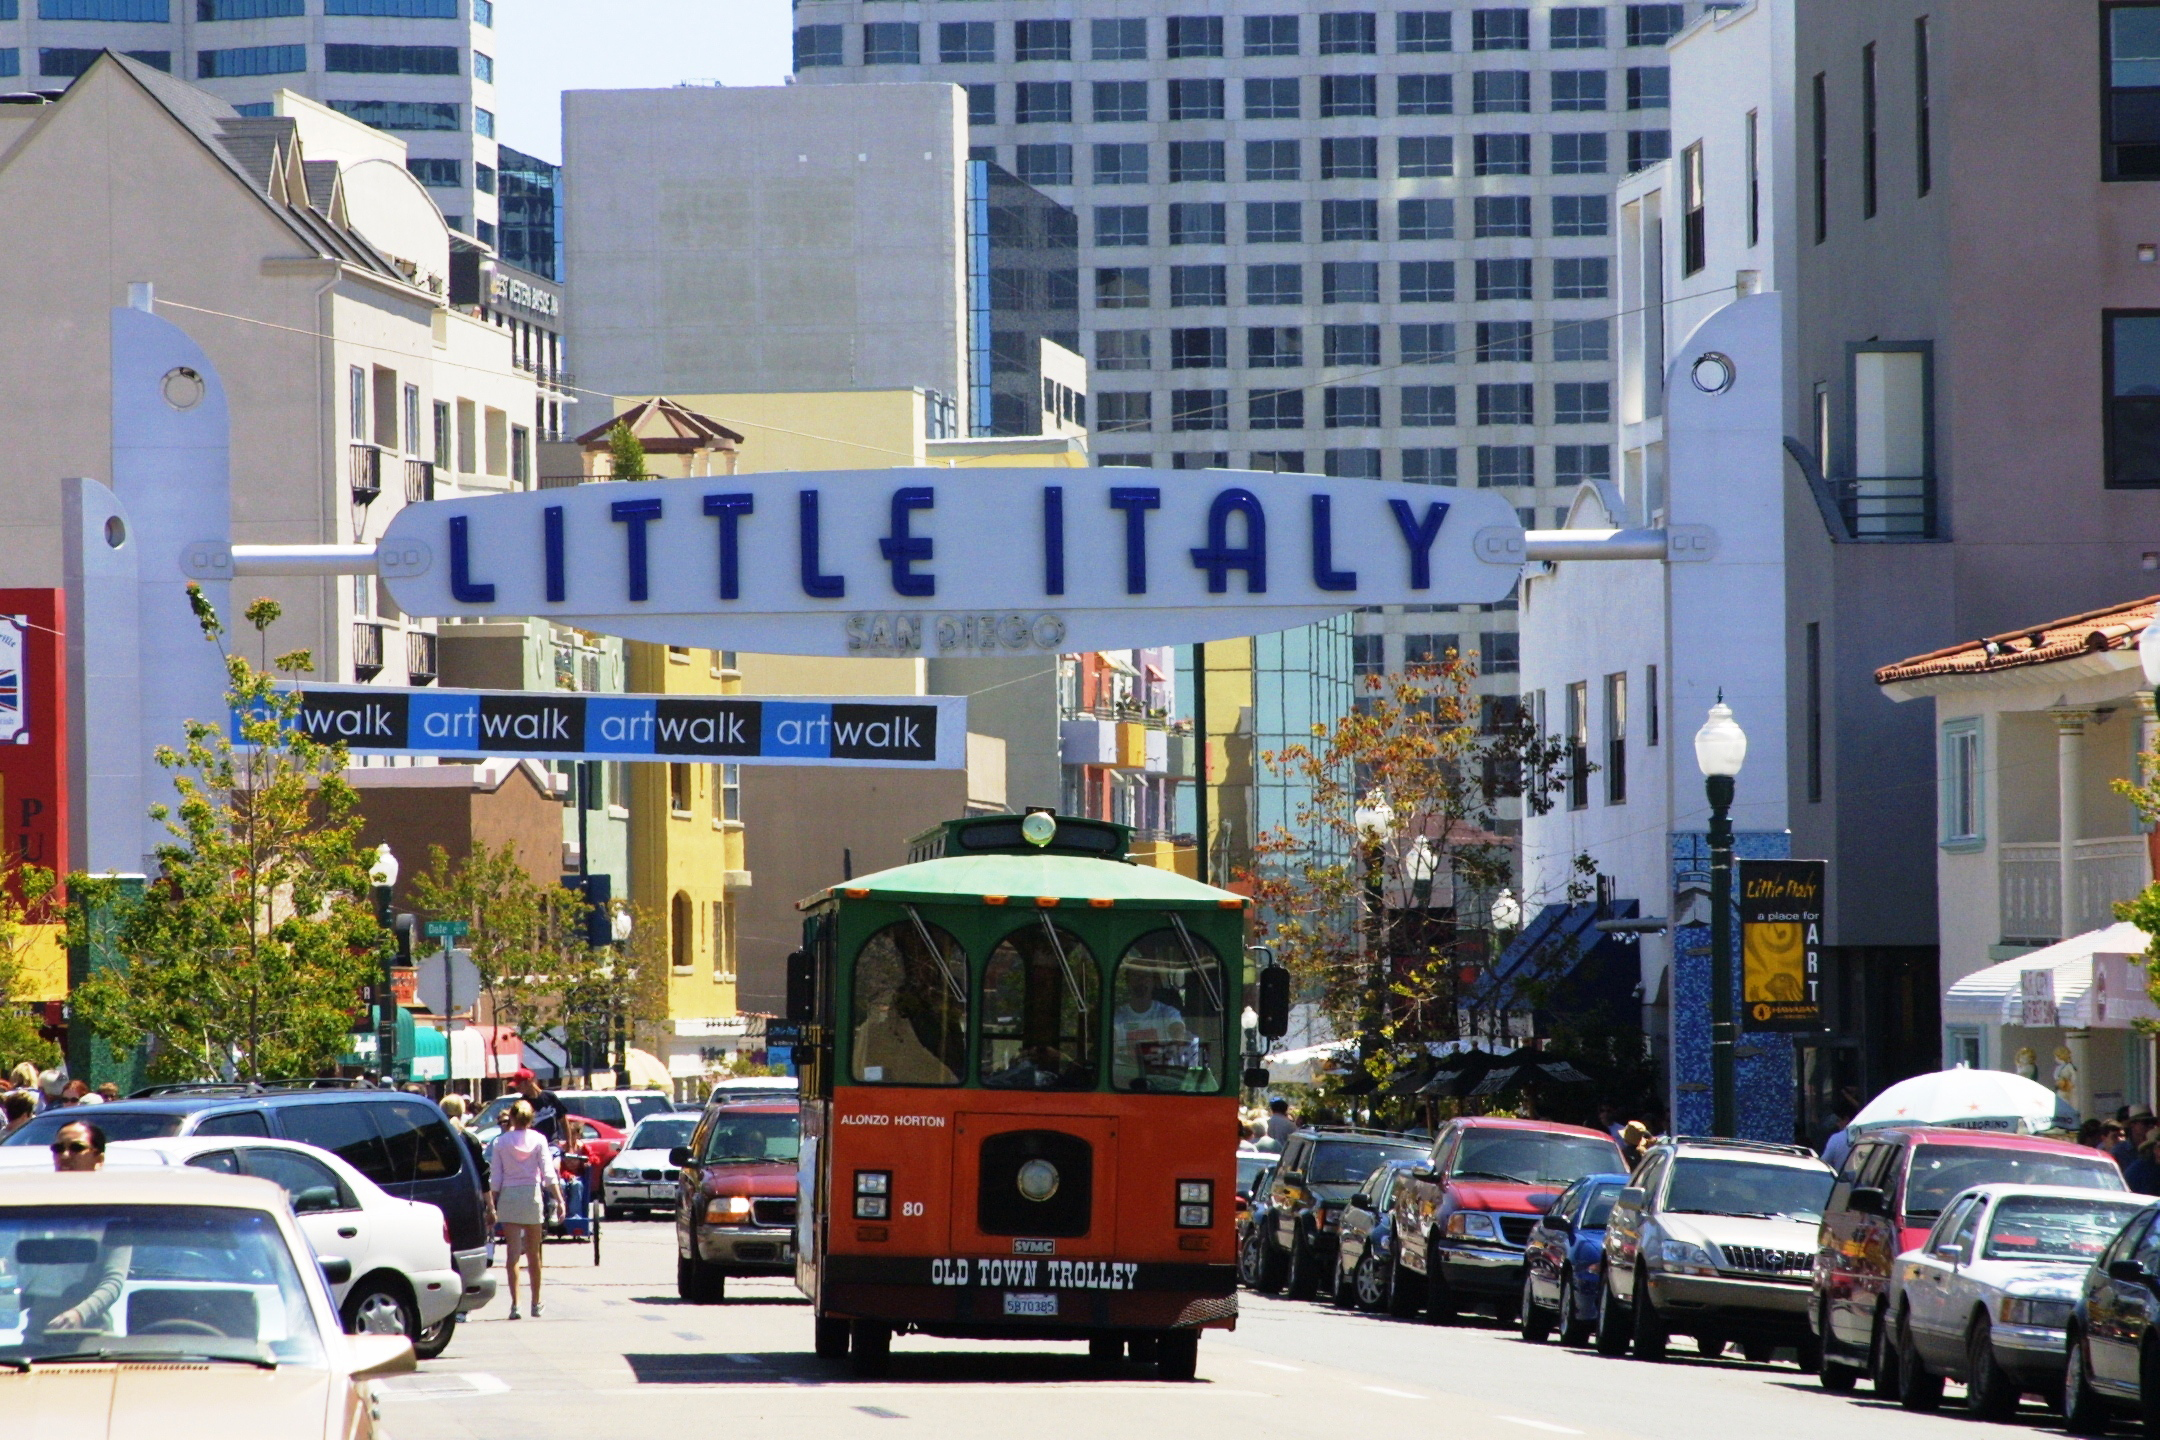 Little Italy Sign and Trolley